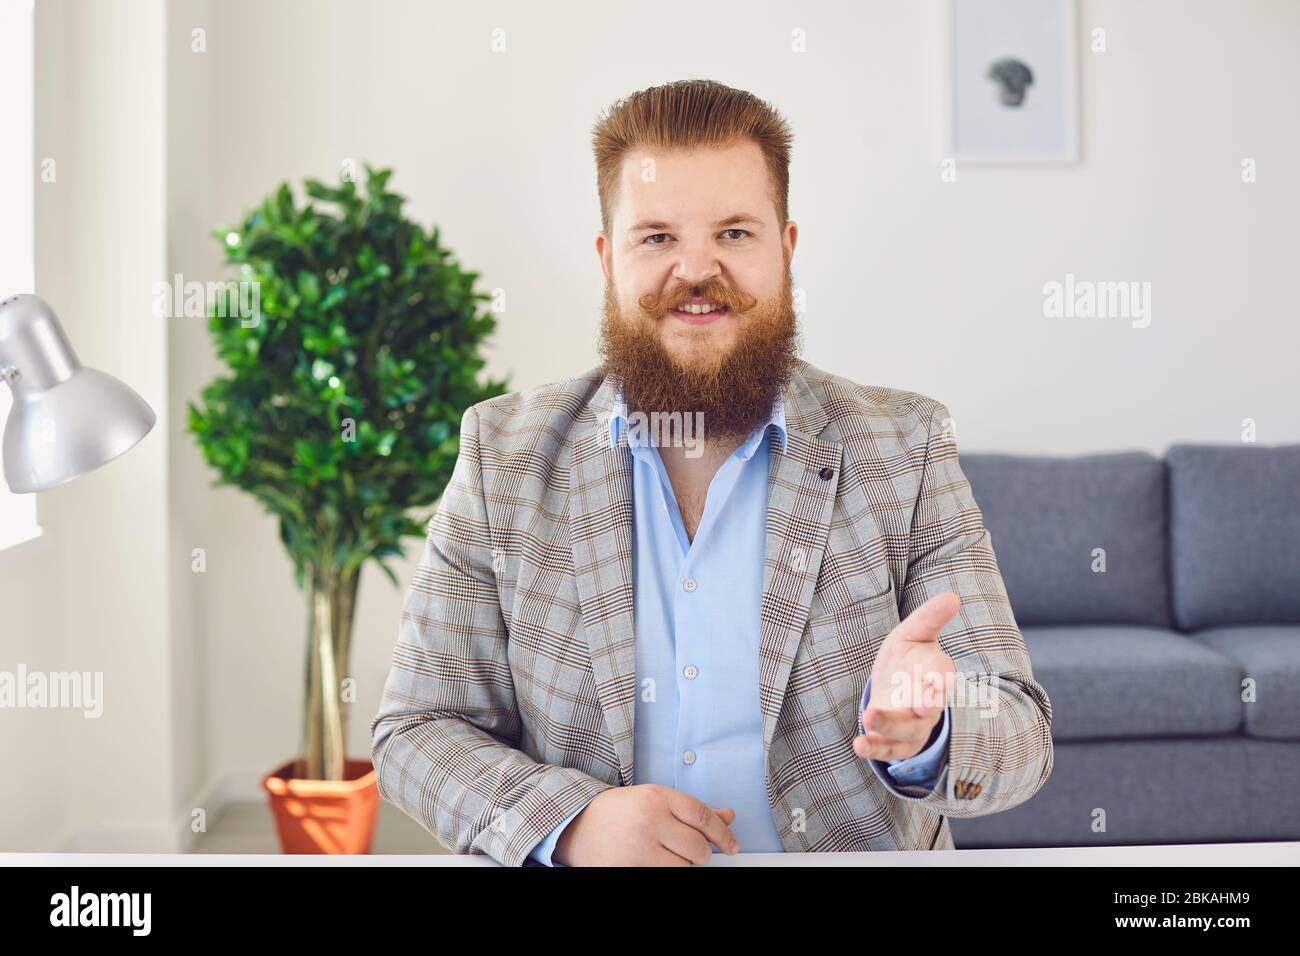 Fat man with a beard looks at the camera talking online using a webcam video chat conference sitting at home office. Stock Photo